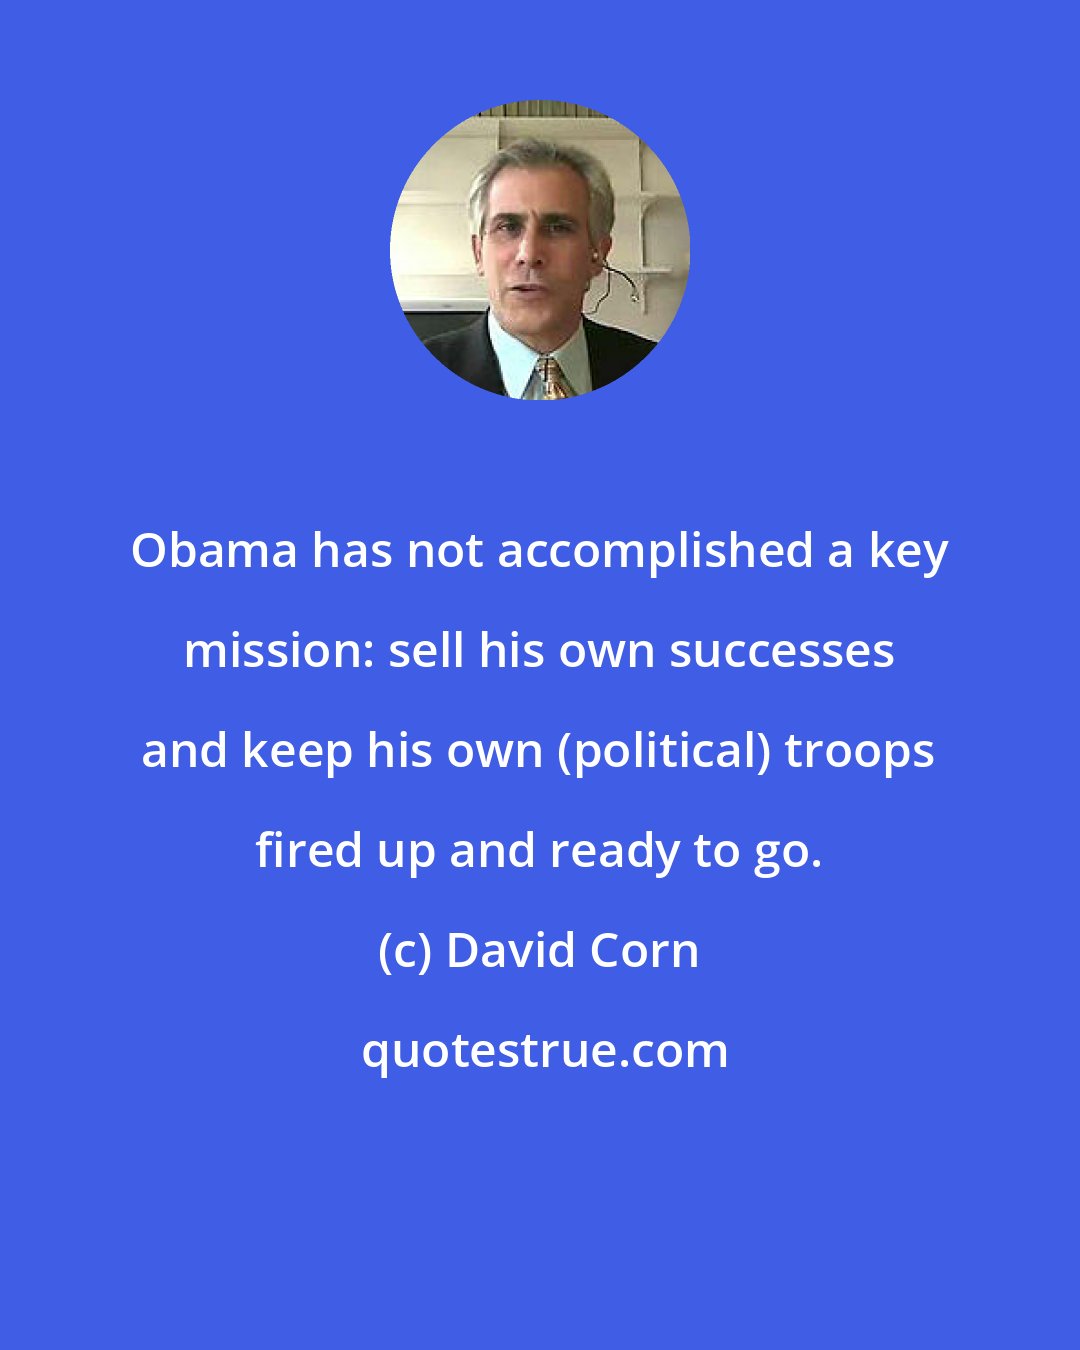 David Corn: Obama has not accomplished a key mission: sell his own successes and keep his own (political) troops fired up and ready to go.